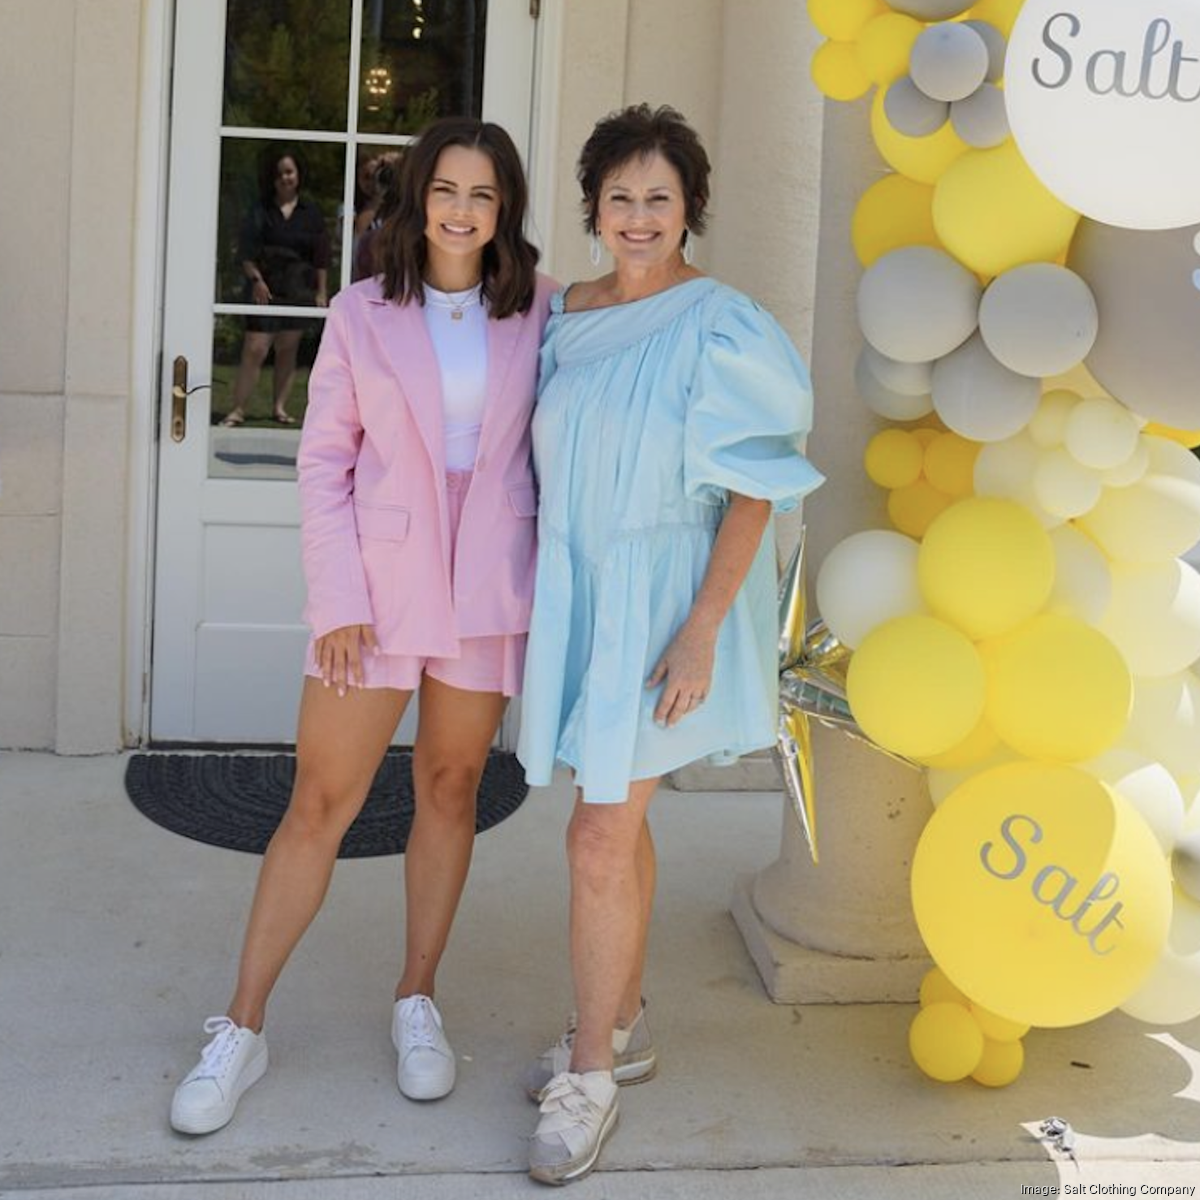 Salt Clothing Co. comes to Meadowbrook - Birmingham Business Journal